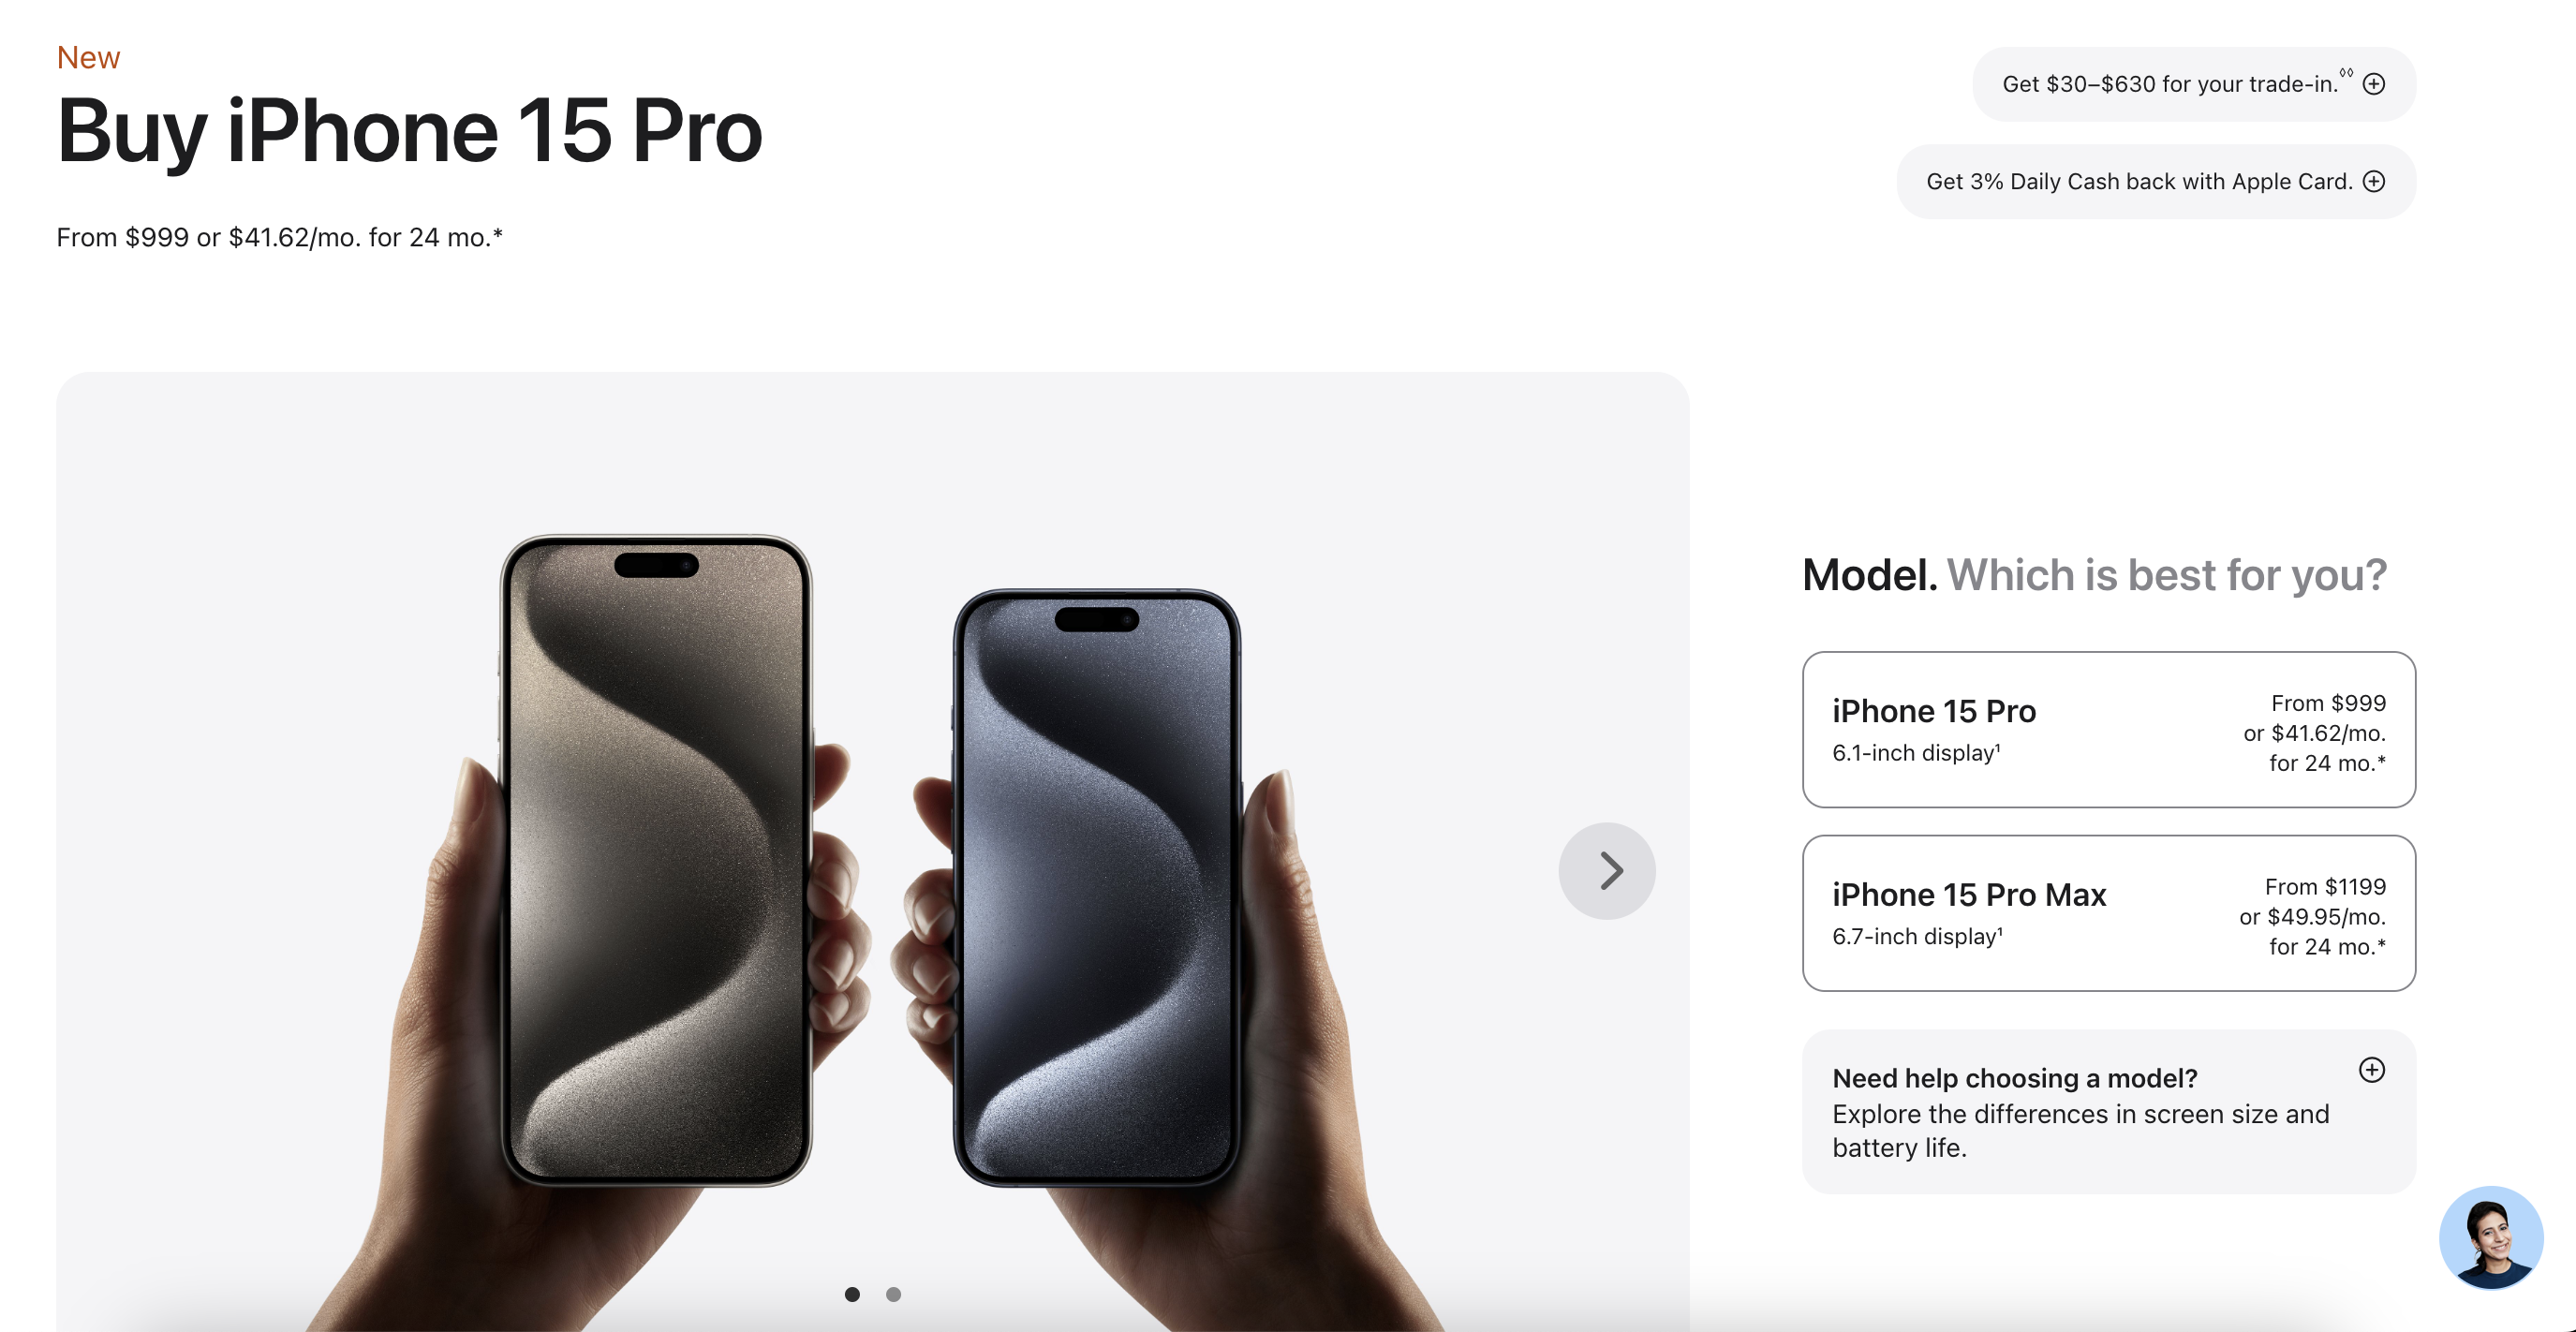 Upsell example from Apple.